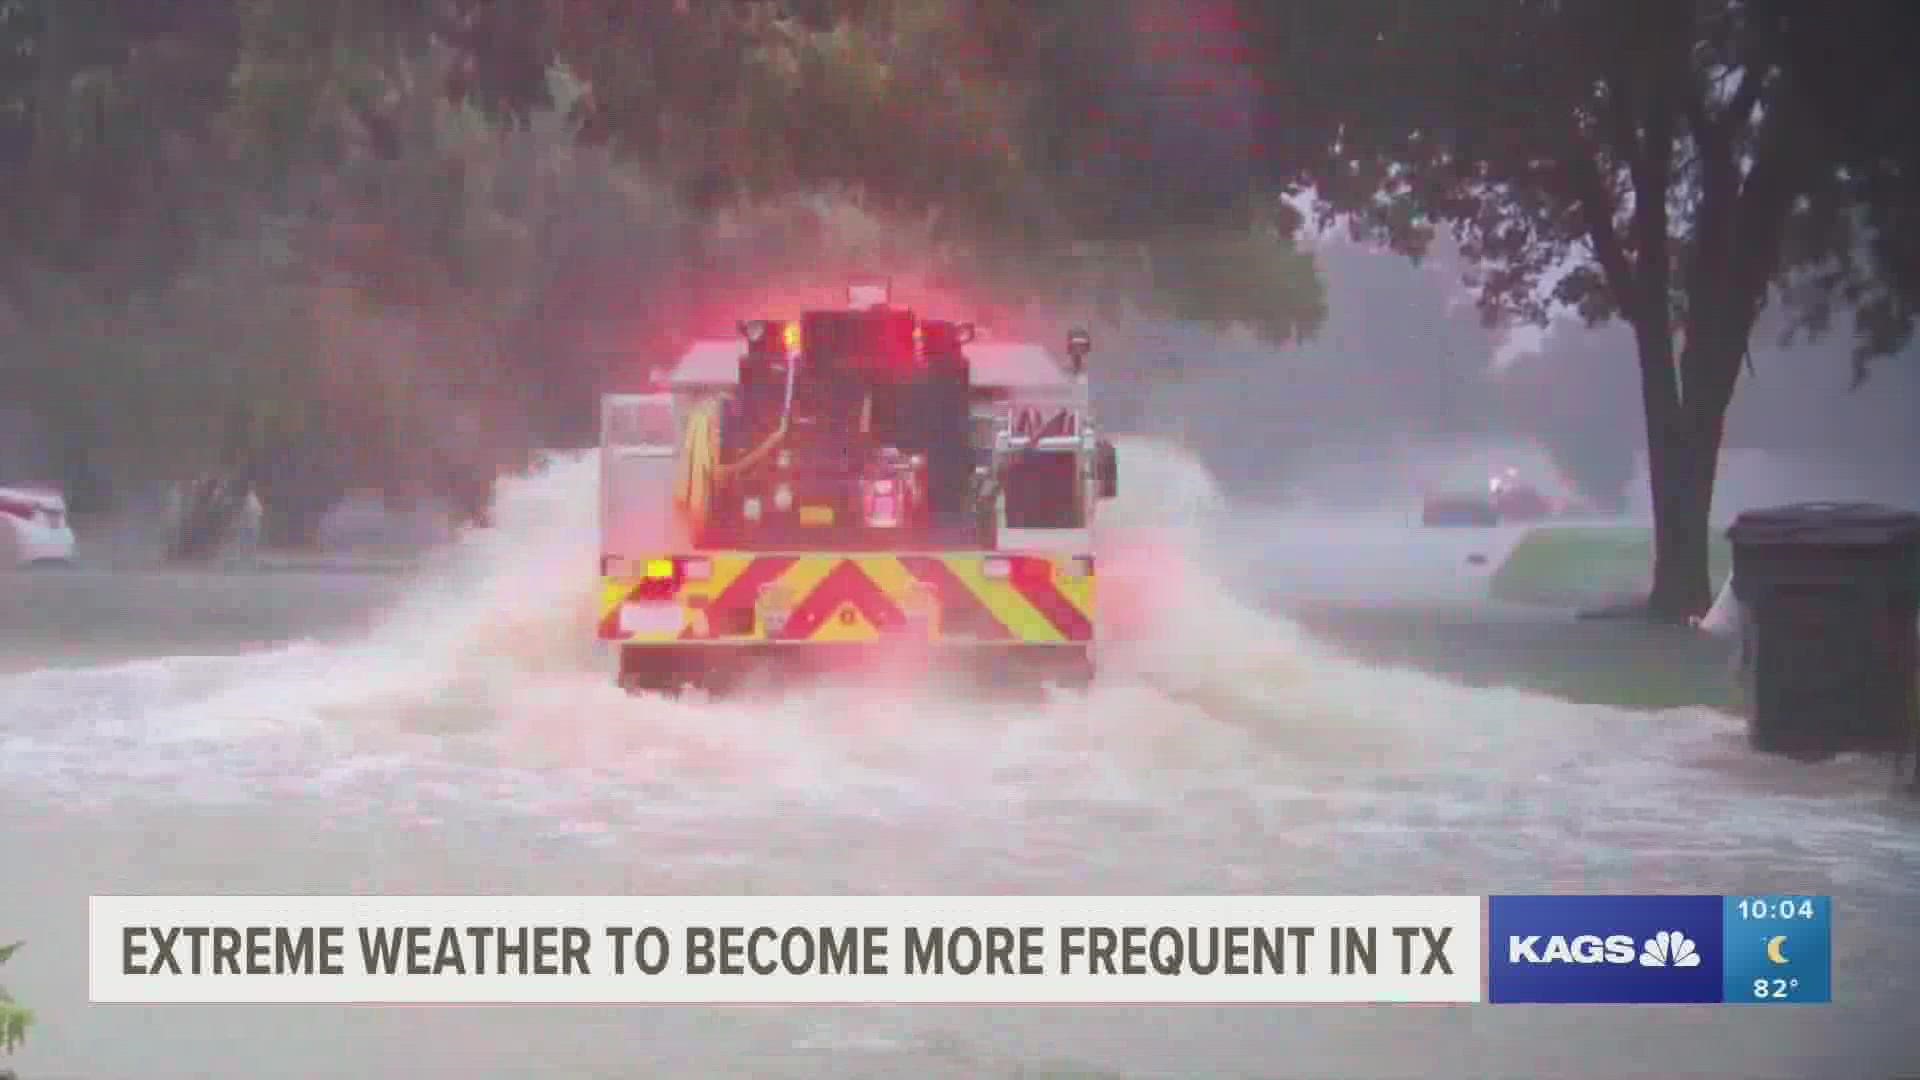 This week's heavy rainfalls across Texas have flooded homes and roadways resulting in water rescue operations and forcing emergency responders into action.